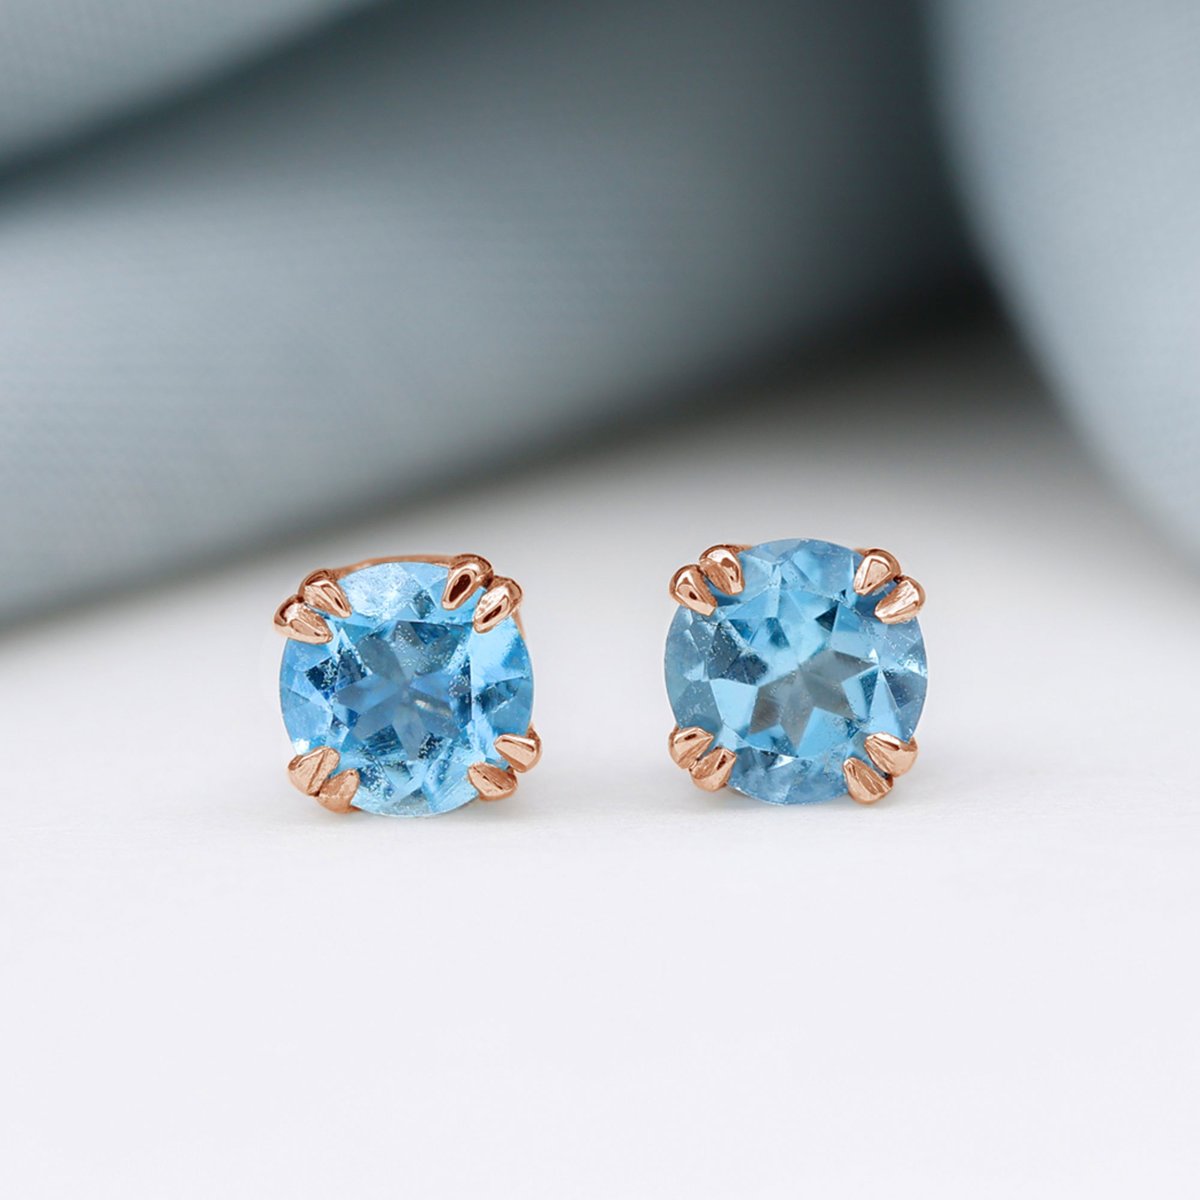 Add a touch of oceanic elegance to your outfit with these Aquamarine Solitaire Studs. 🌊

amazon.com/dp/B09ZLLLZLV 

#aquamarinejewelry #aquamarineearrings #studearrings #solitaireearrings #lightbluejewelry #finejewelry #aquamarinelove #handmadejewelry #instajewelry #earrings